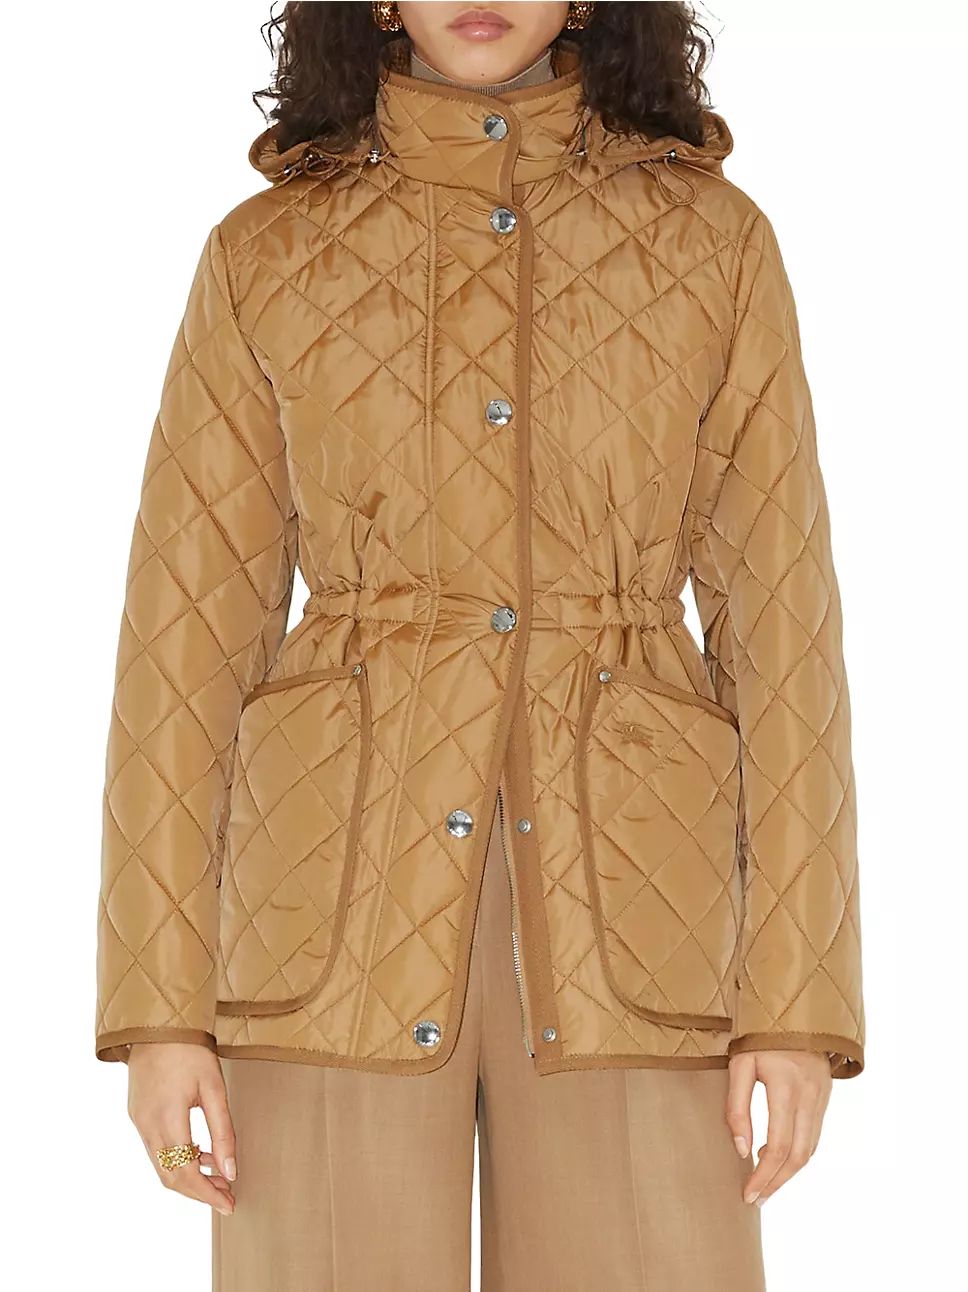 Burberry Roxbugh Quilted Jacket | Saks Fifth Avenue